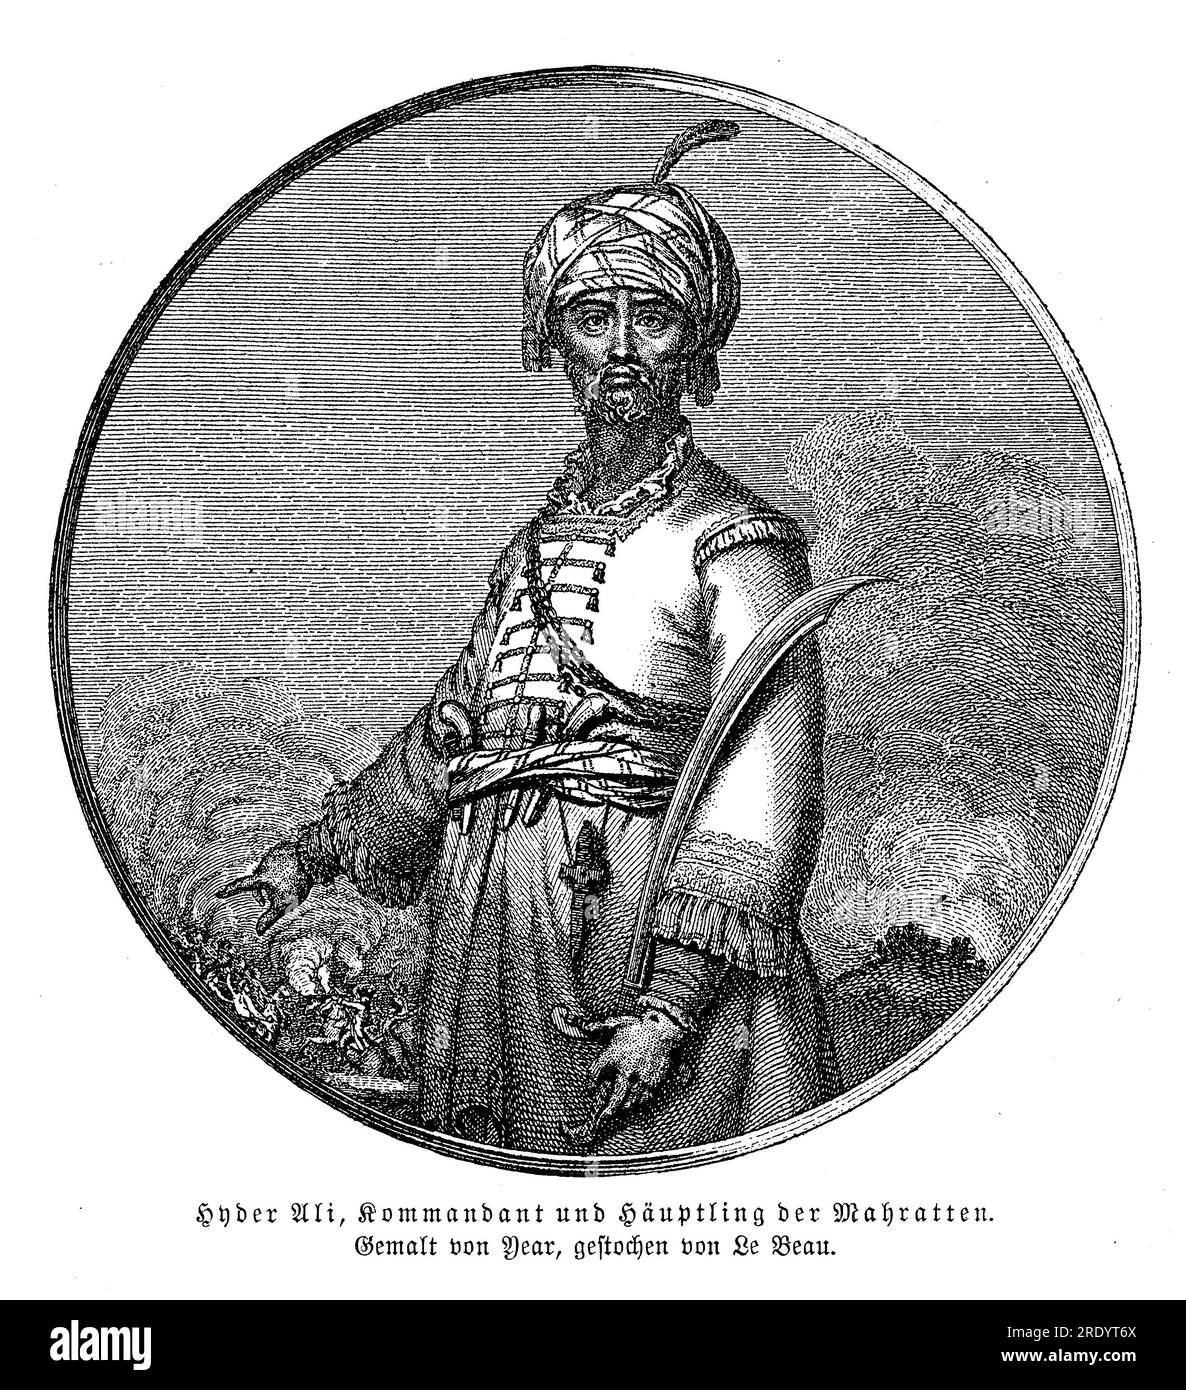 Hyder Ali (1722-1782) was an Indian ruler and military strategist who played a significant role in the history of South India, particularly during the 18th century. He was the Sultan and de facto ruler of the Kingdom of Mysore in present-day Karnataka Stock Photo